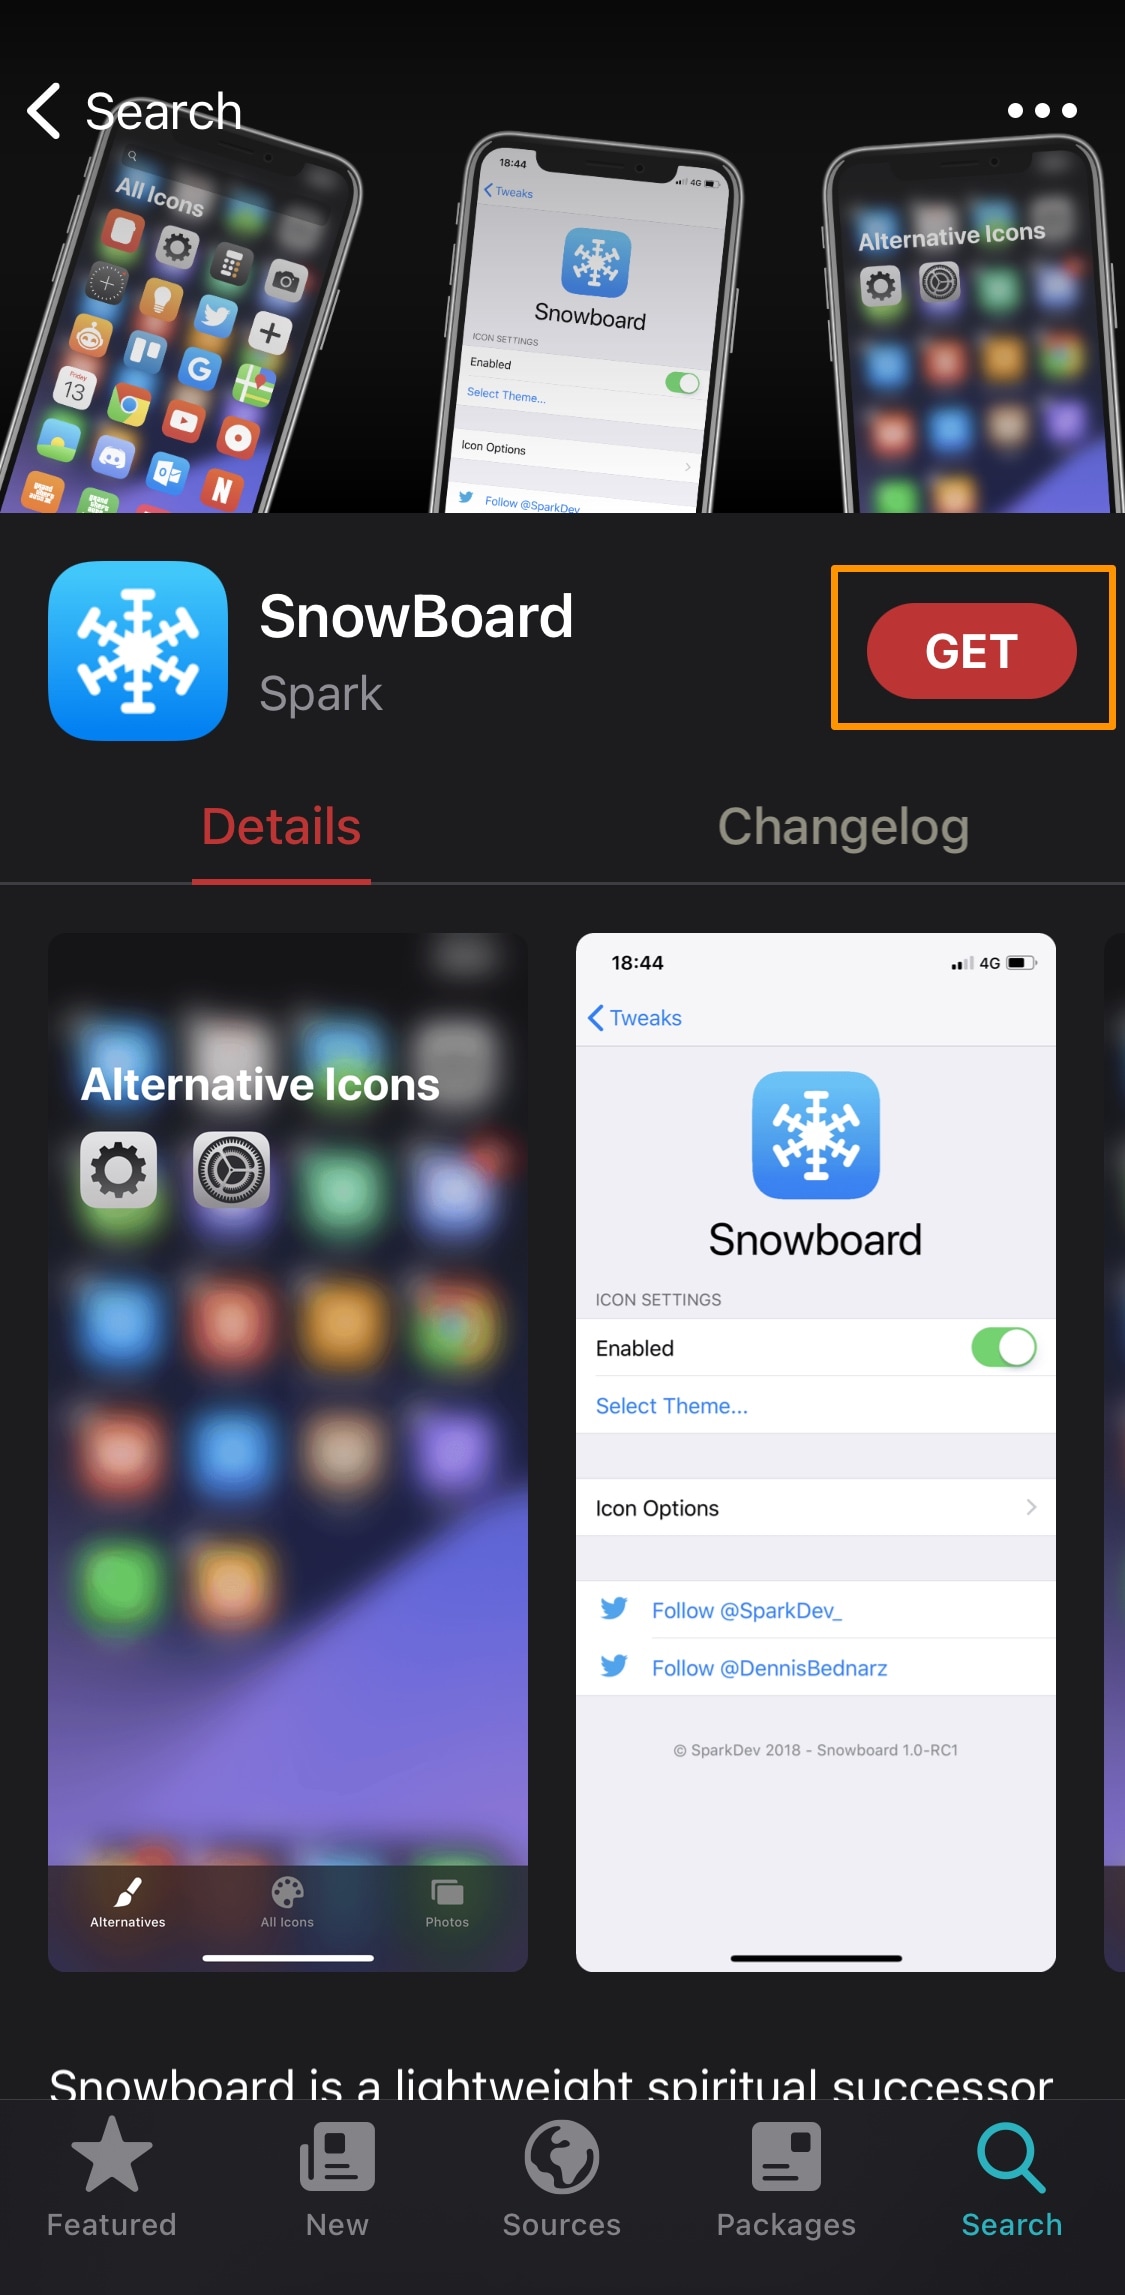 Sileo Get button to download the SnowBoard package.